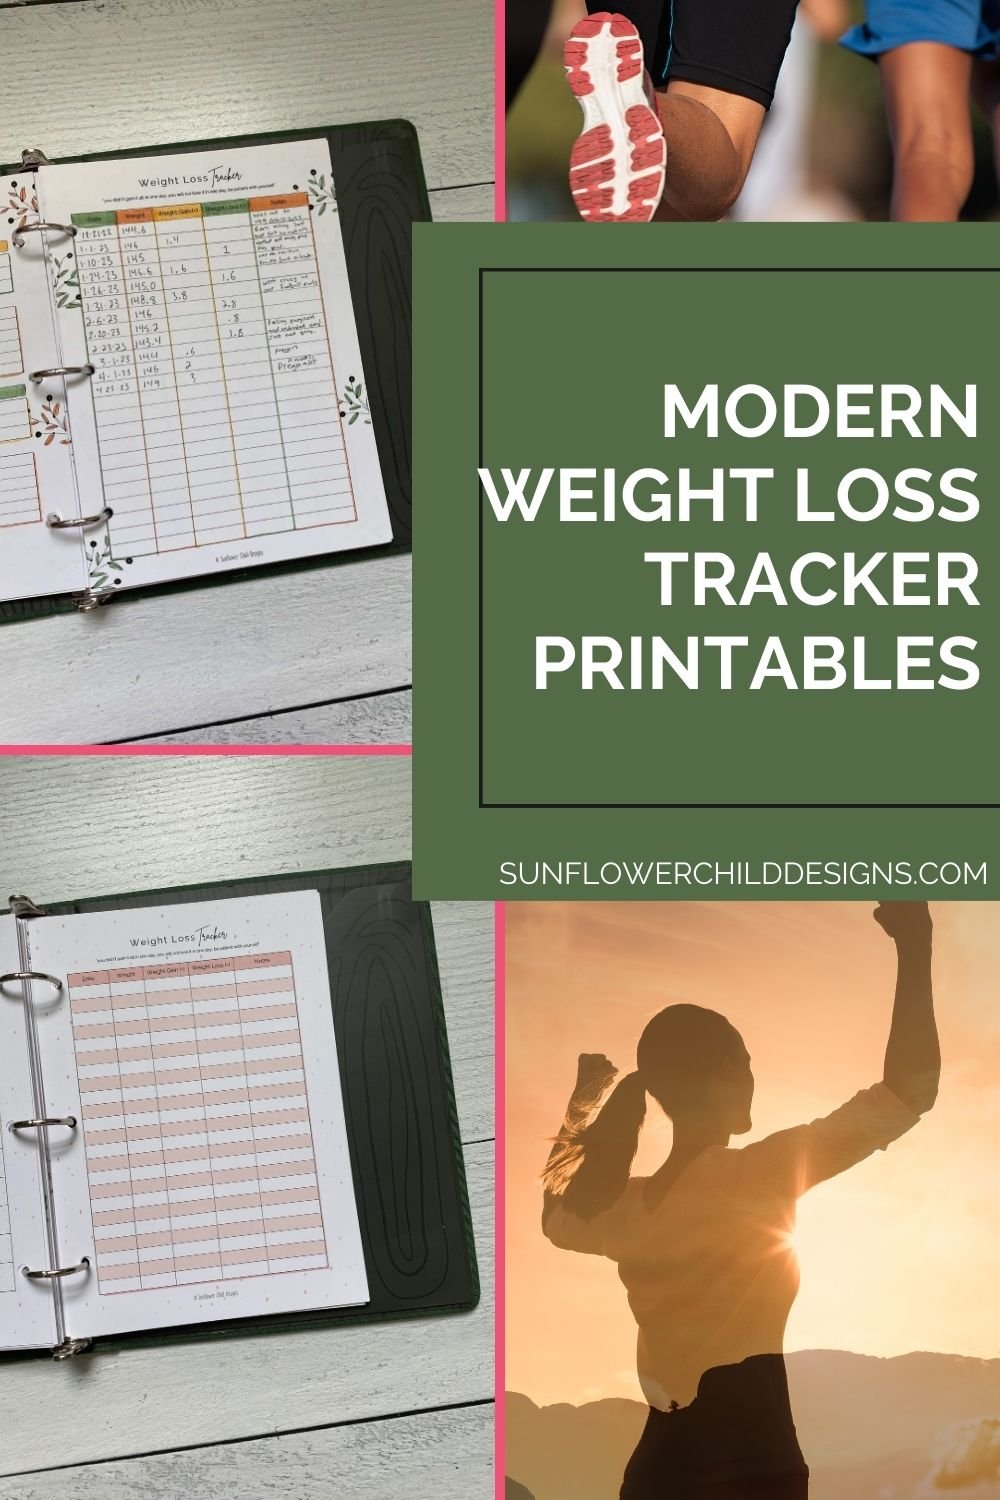 "Kickstart Your Slim-Down Journey with Our Stylish Modern Weight Loss Tracker Printable!"